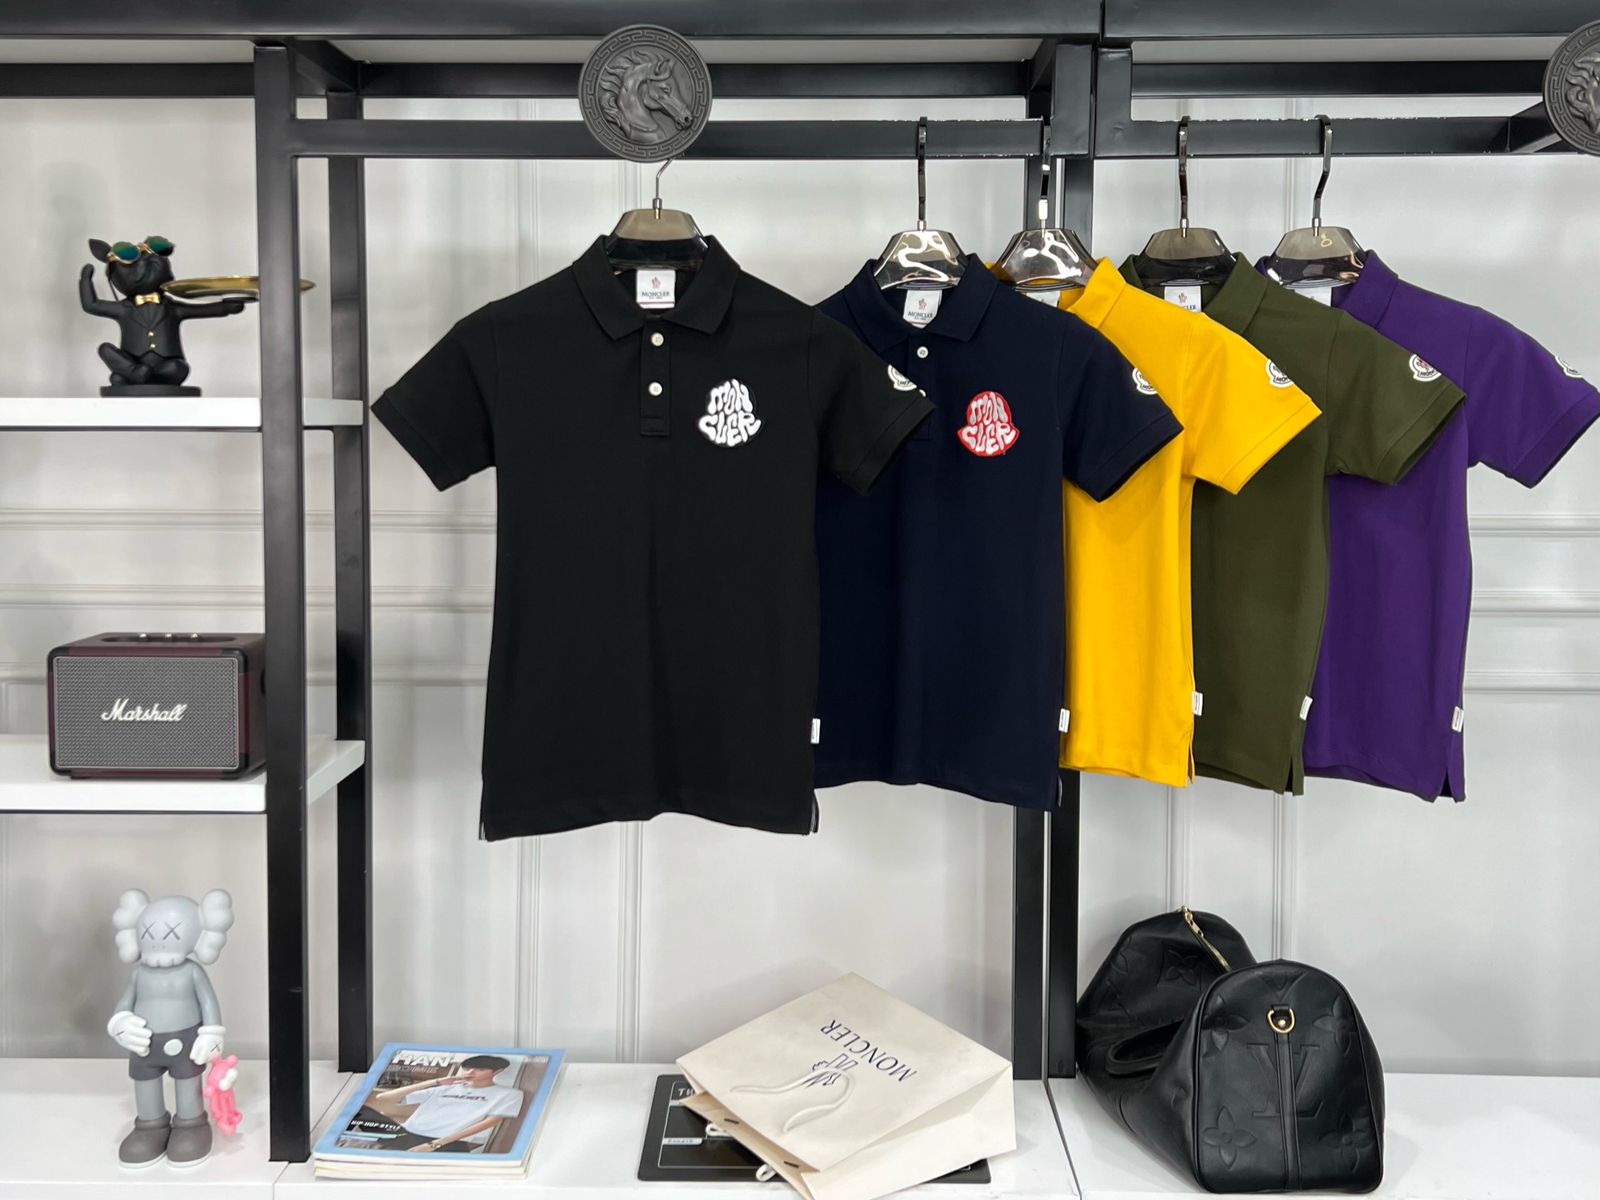 Embroidered Polo T-shirt For Kids